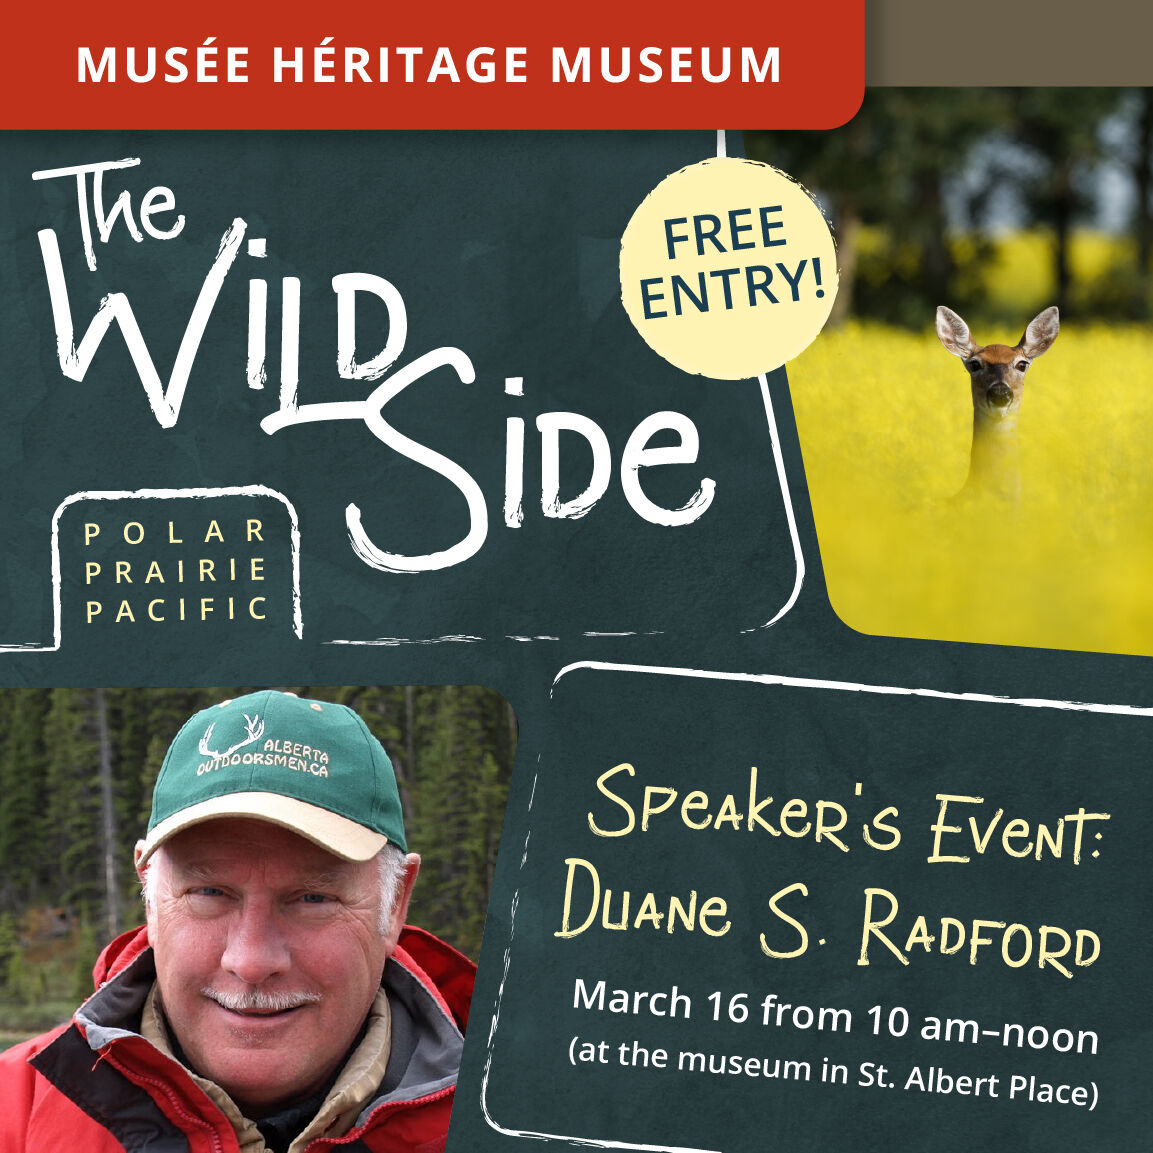 We are pleased to welcome award-winning wildlife author and photographer Duane S. Radford to the Musée Héritage Museum on March 16 from 10 am to noon. He will share stories about surviving outdoors. More info here: artsandheritage.ca/pages/events-t… #event #free #special #speaker #museum